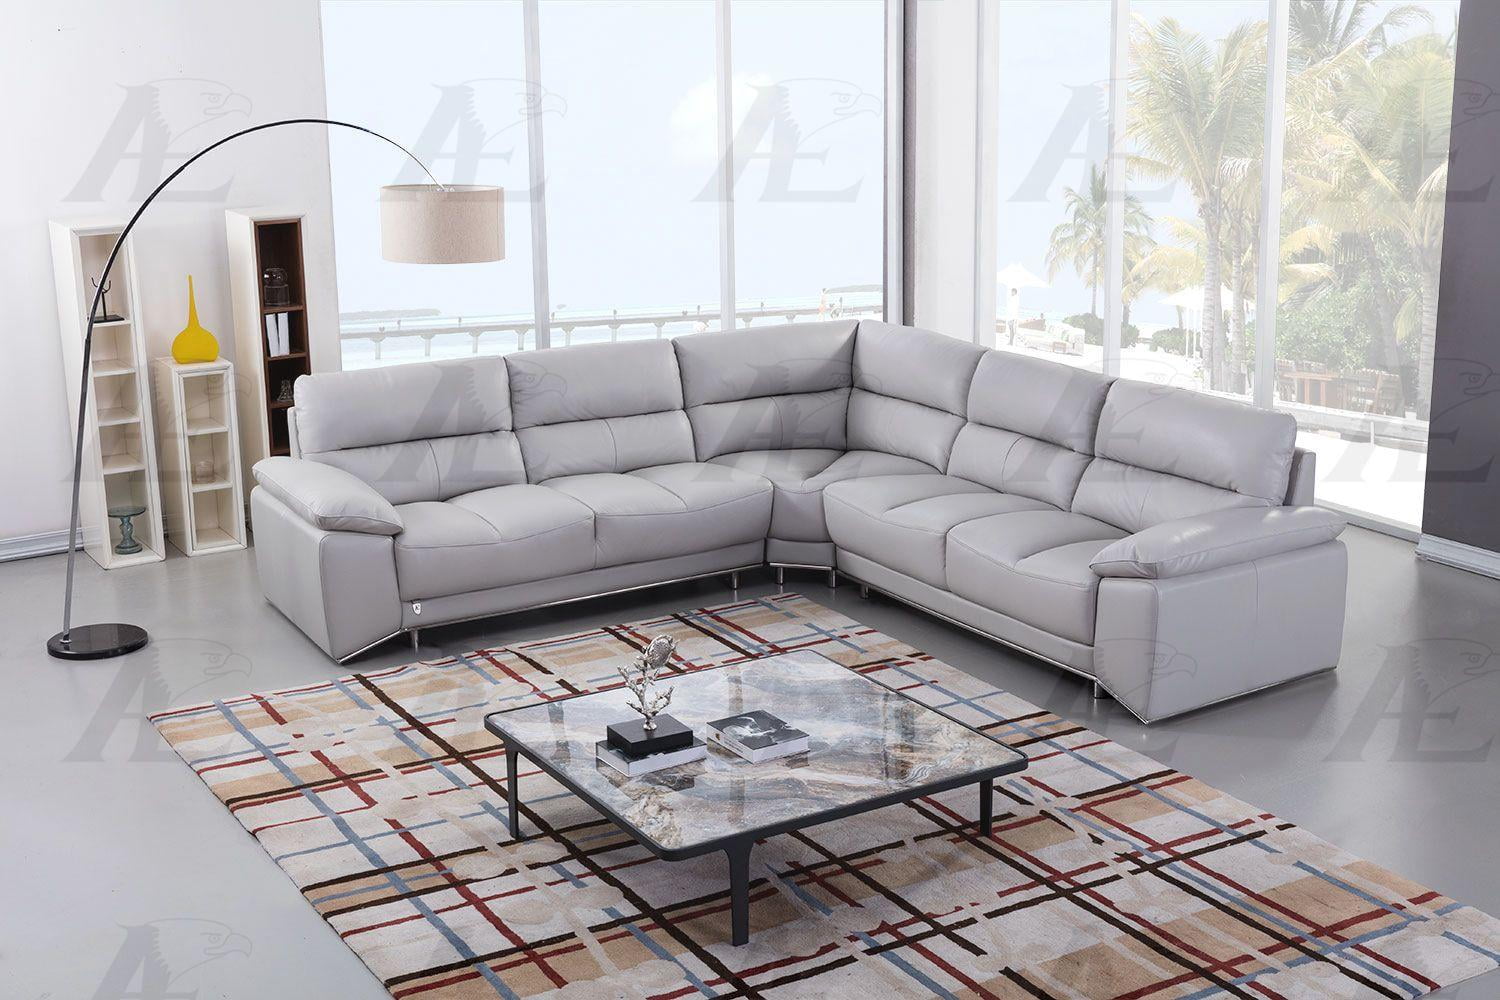 Italian Top Grain Leather Sectional Set, Gray Leather Sofas Living Room